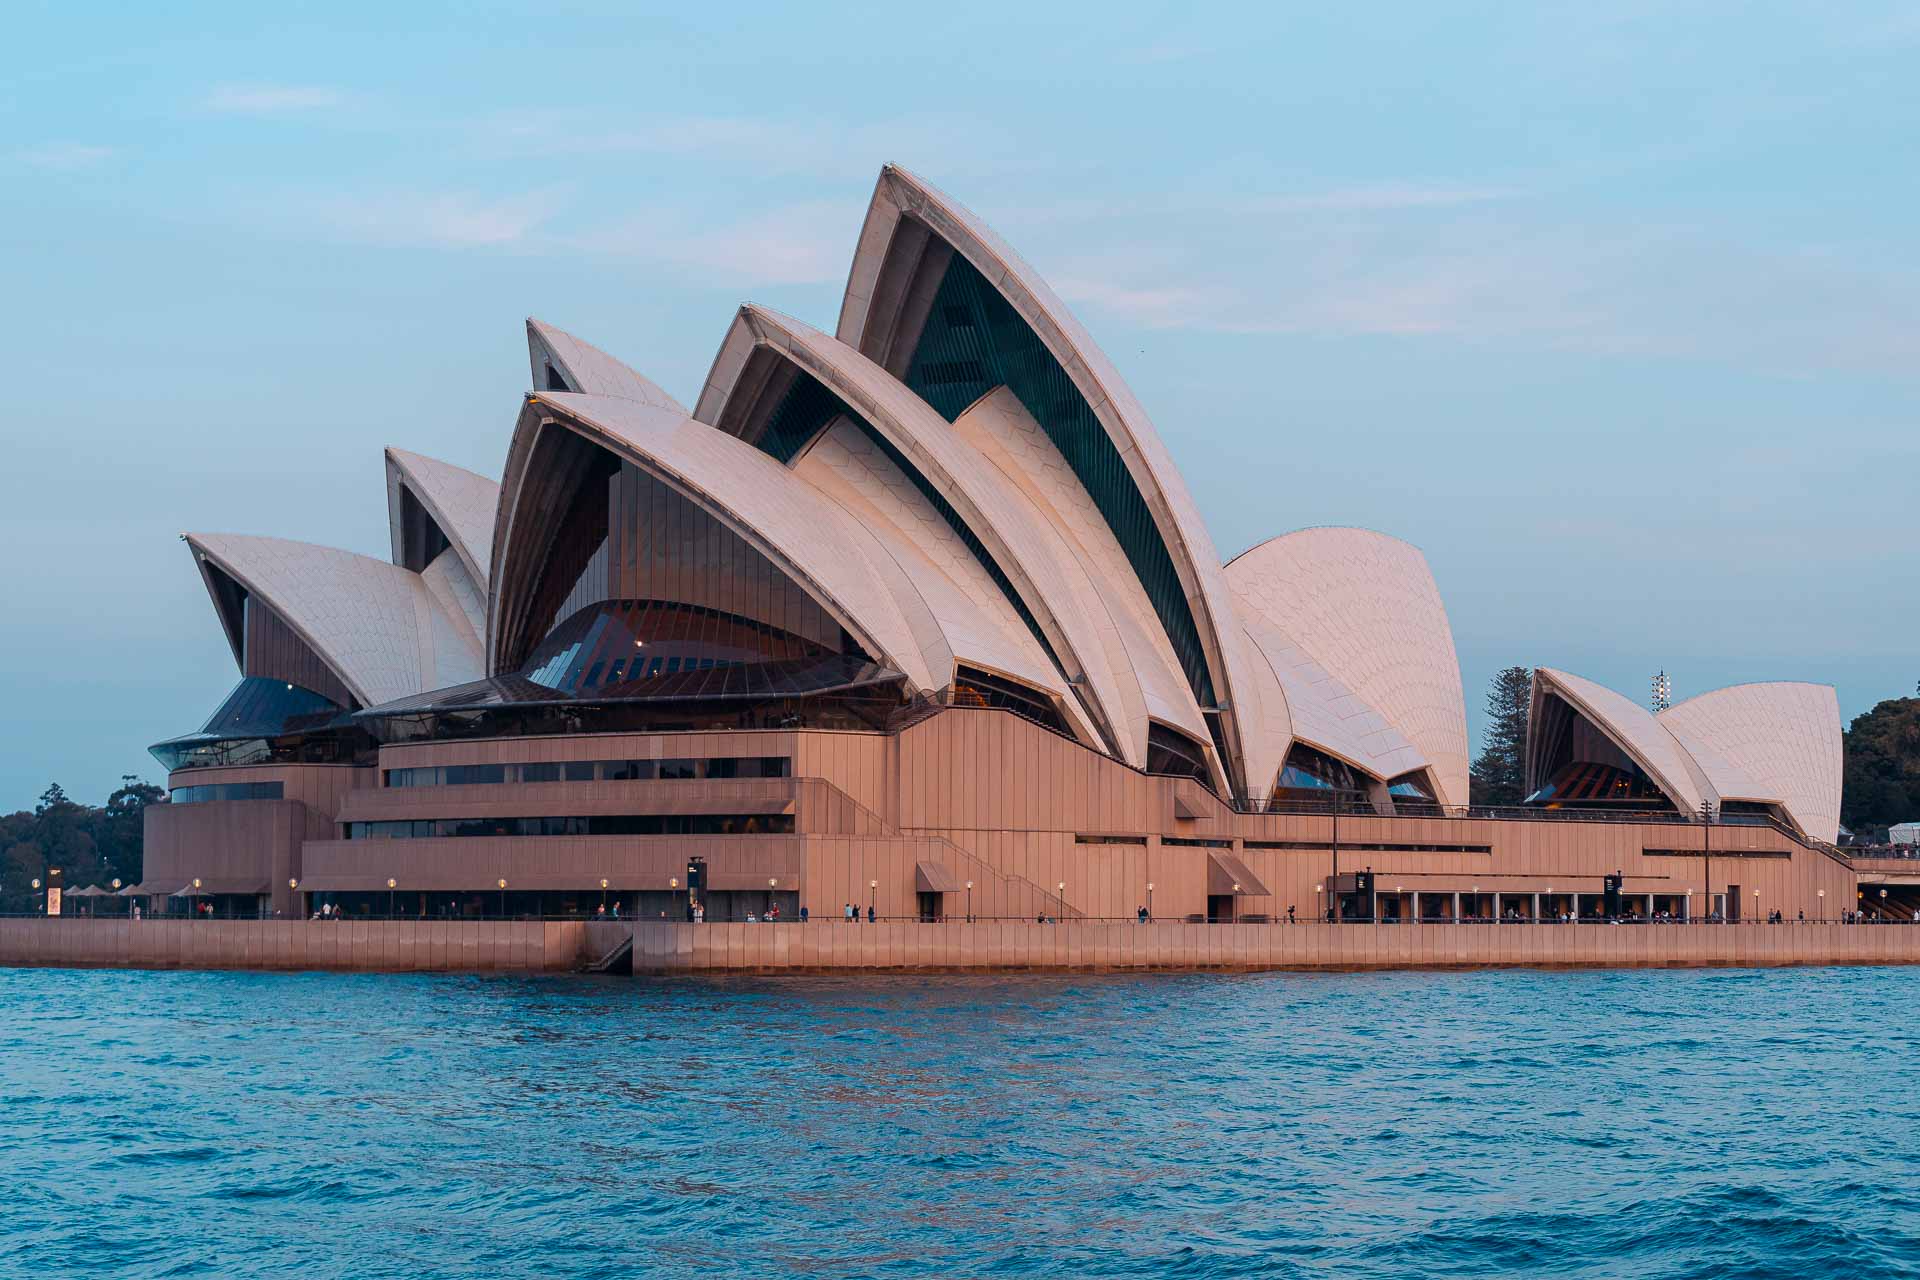 The Sydney Opera House seen from the river